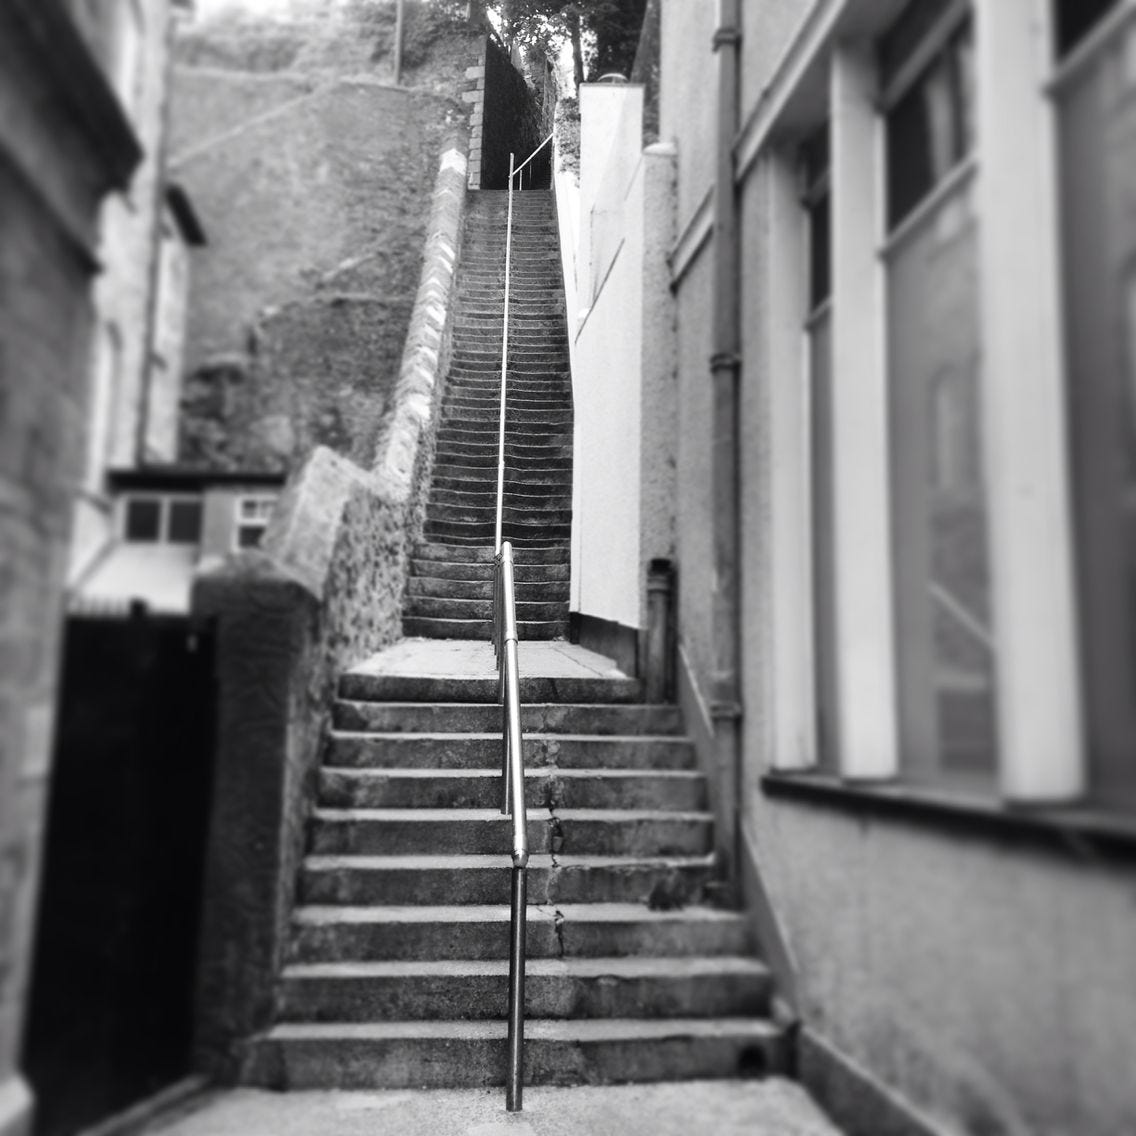 Jacobs ladder in Falmouth 111 steps installed in the 1830s-40s by Jacob ...